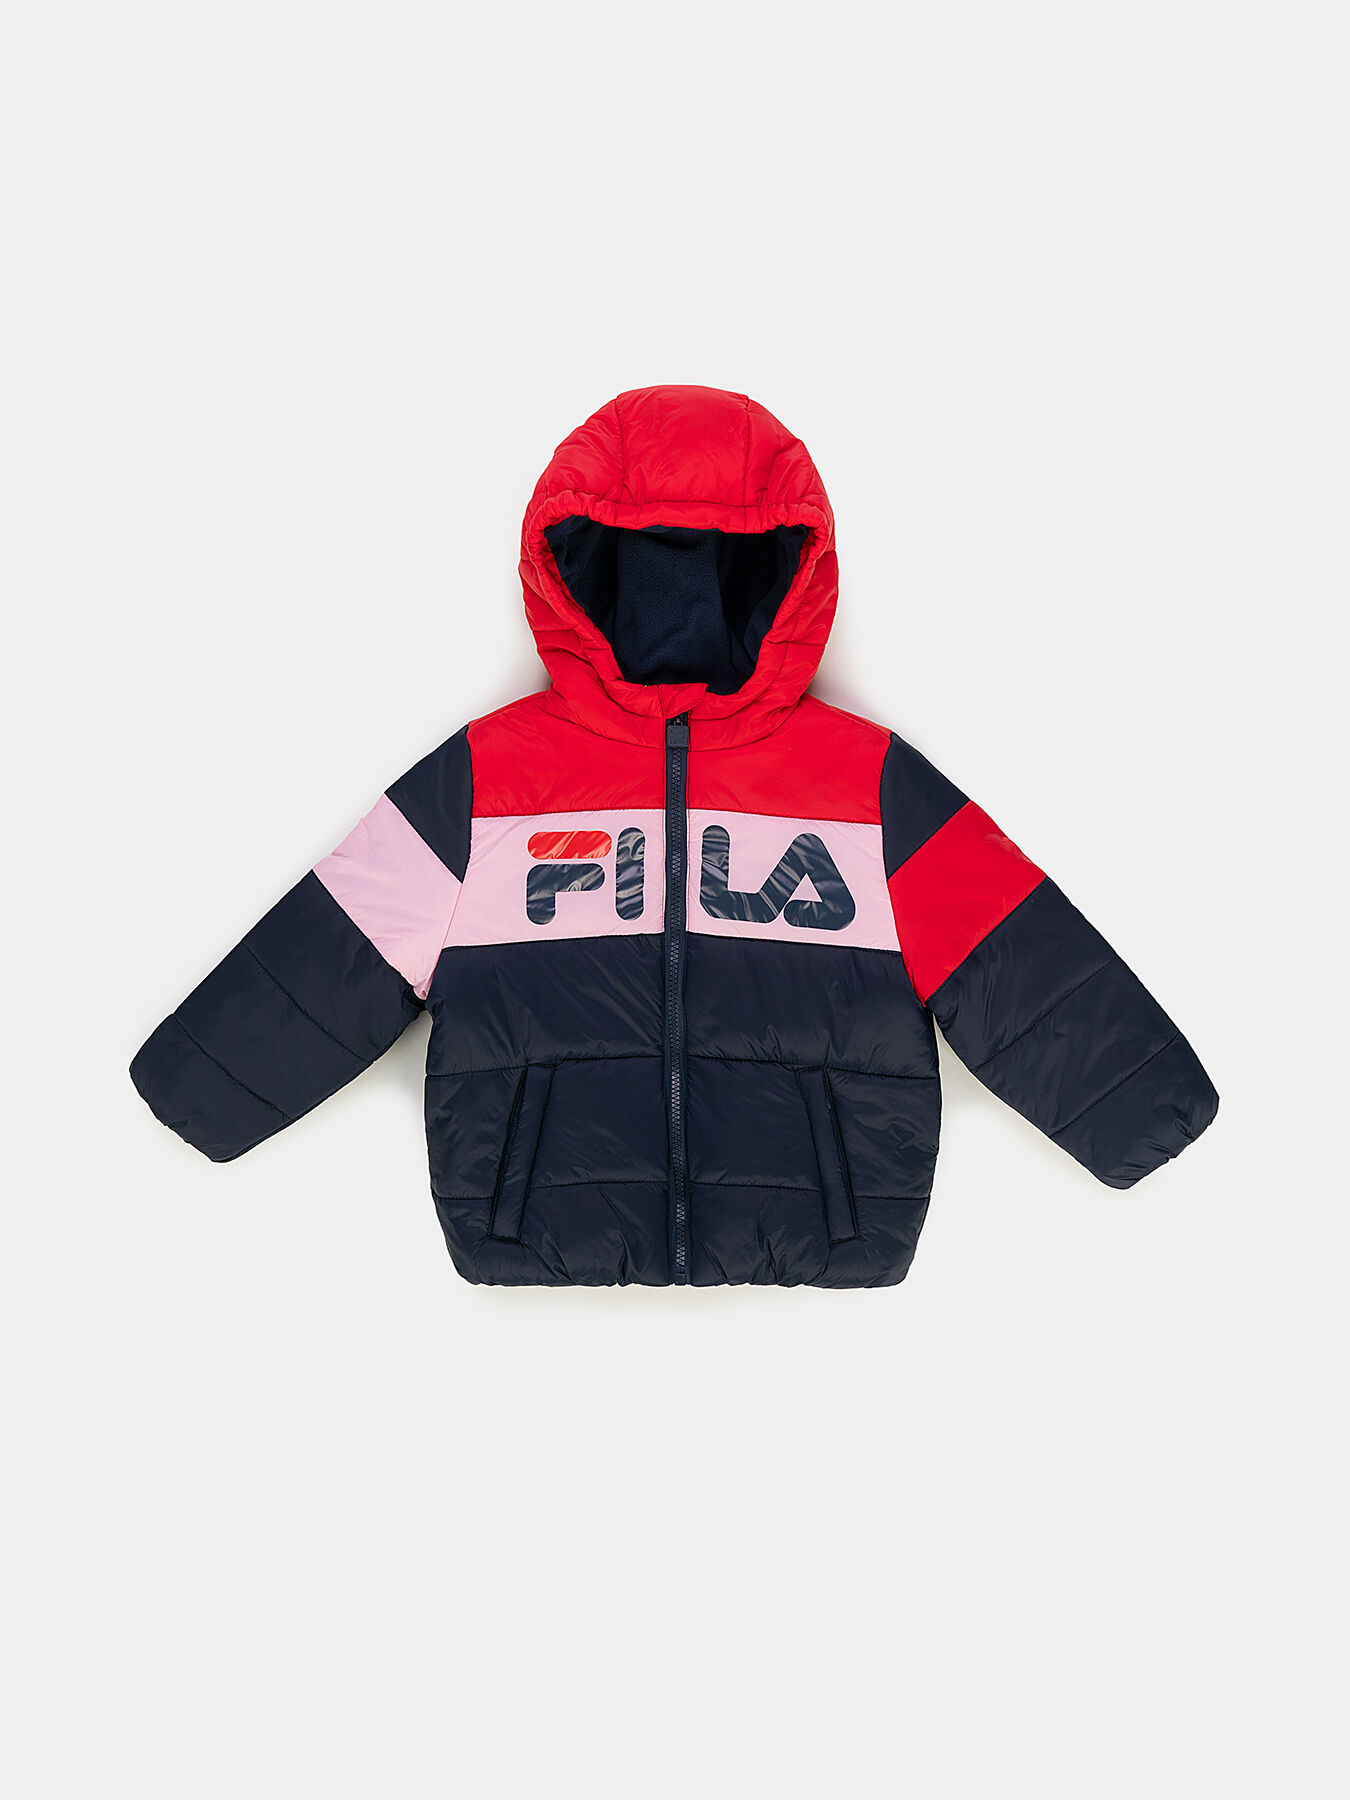 Sale - 21% FILA STORM Jacket Price reduced from € 92,00 to € 73 